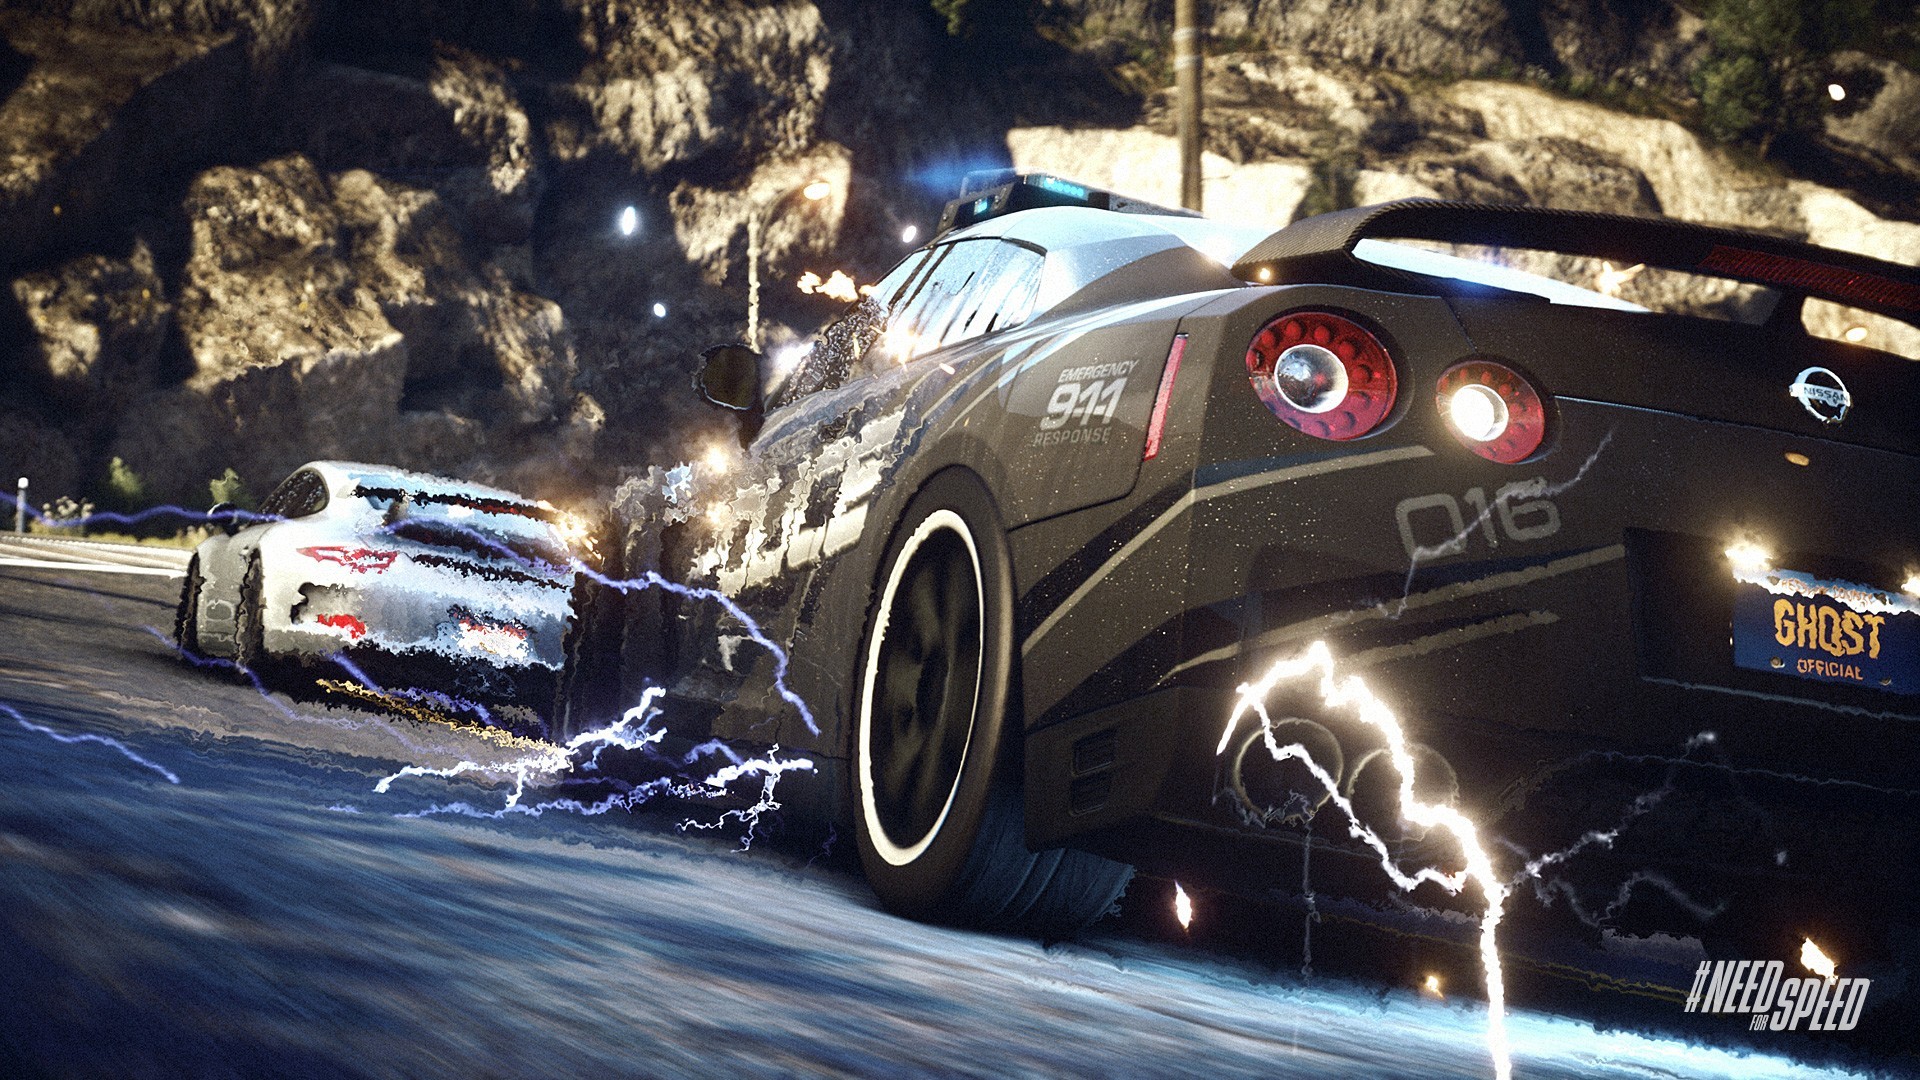 1920x1080 Need For Speed Wallpaper (31 Wallpapers)